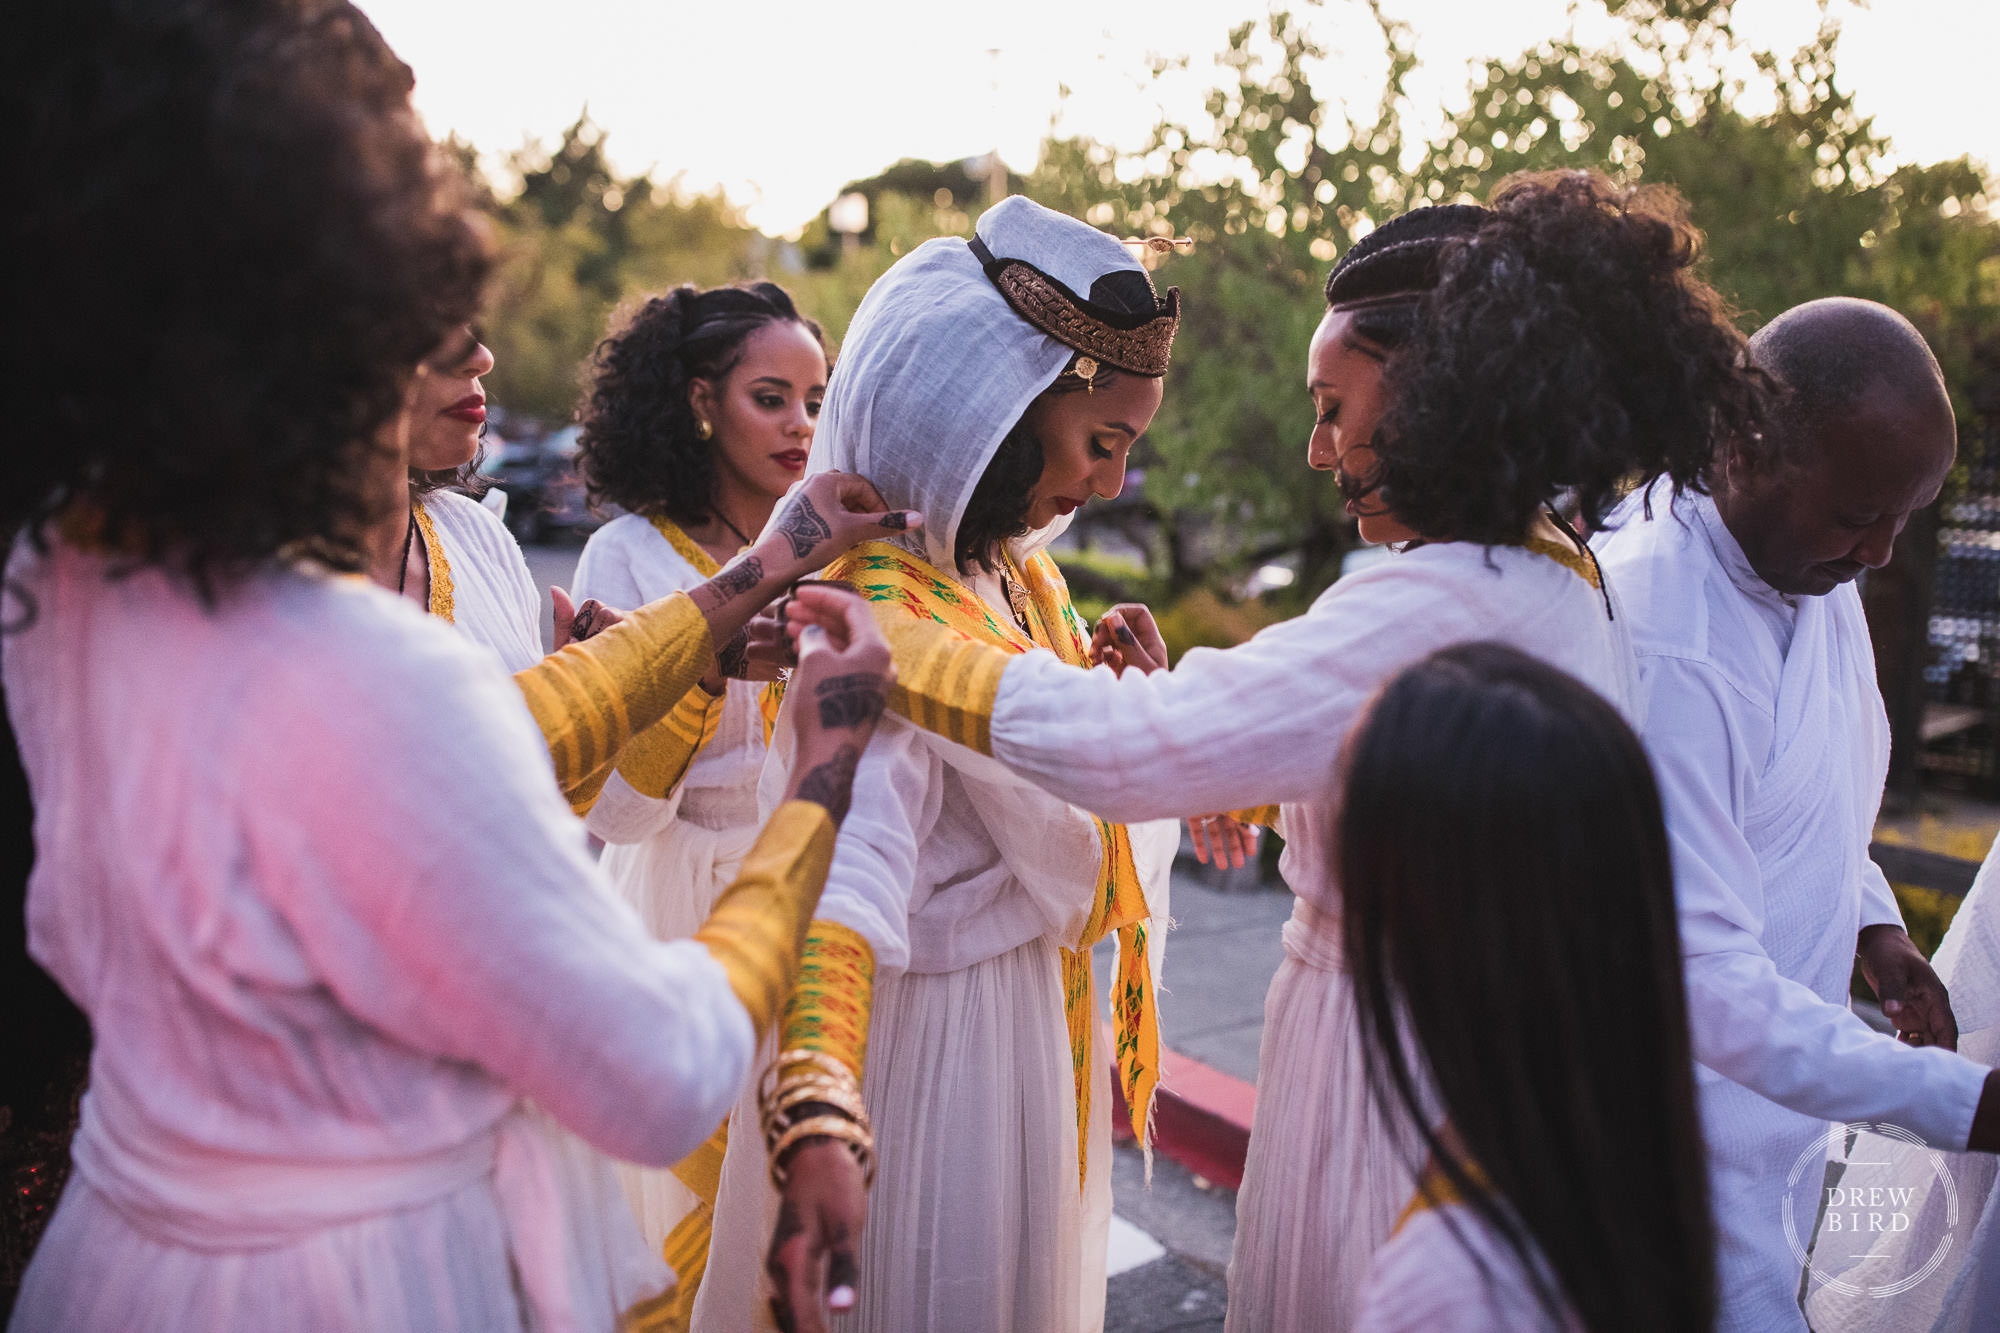 Bride gets help with her traditional ethiopian wedding dress in Marin County near San Francisco by photographer Drew Bird.